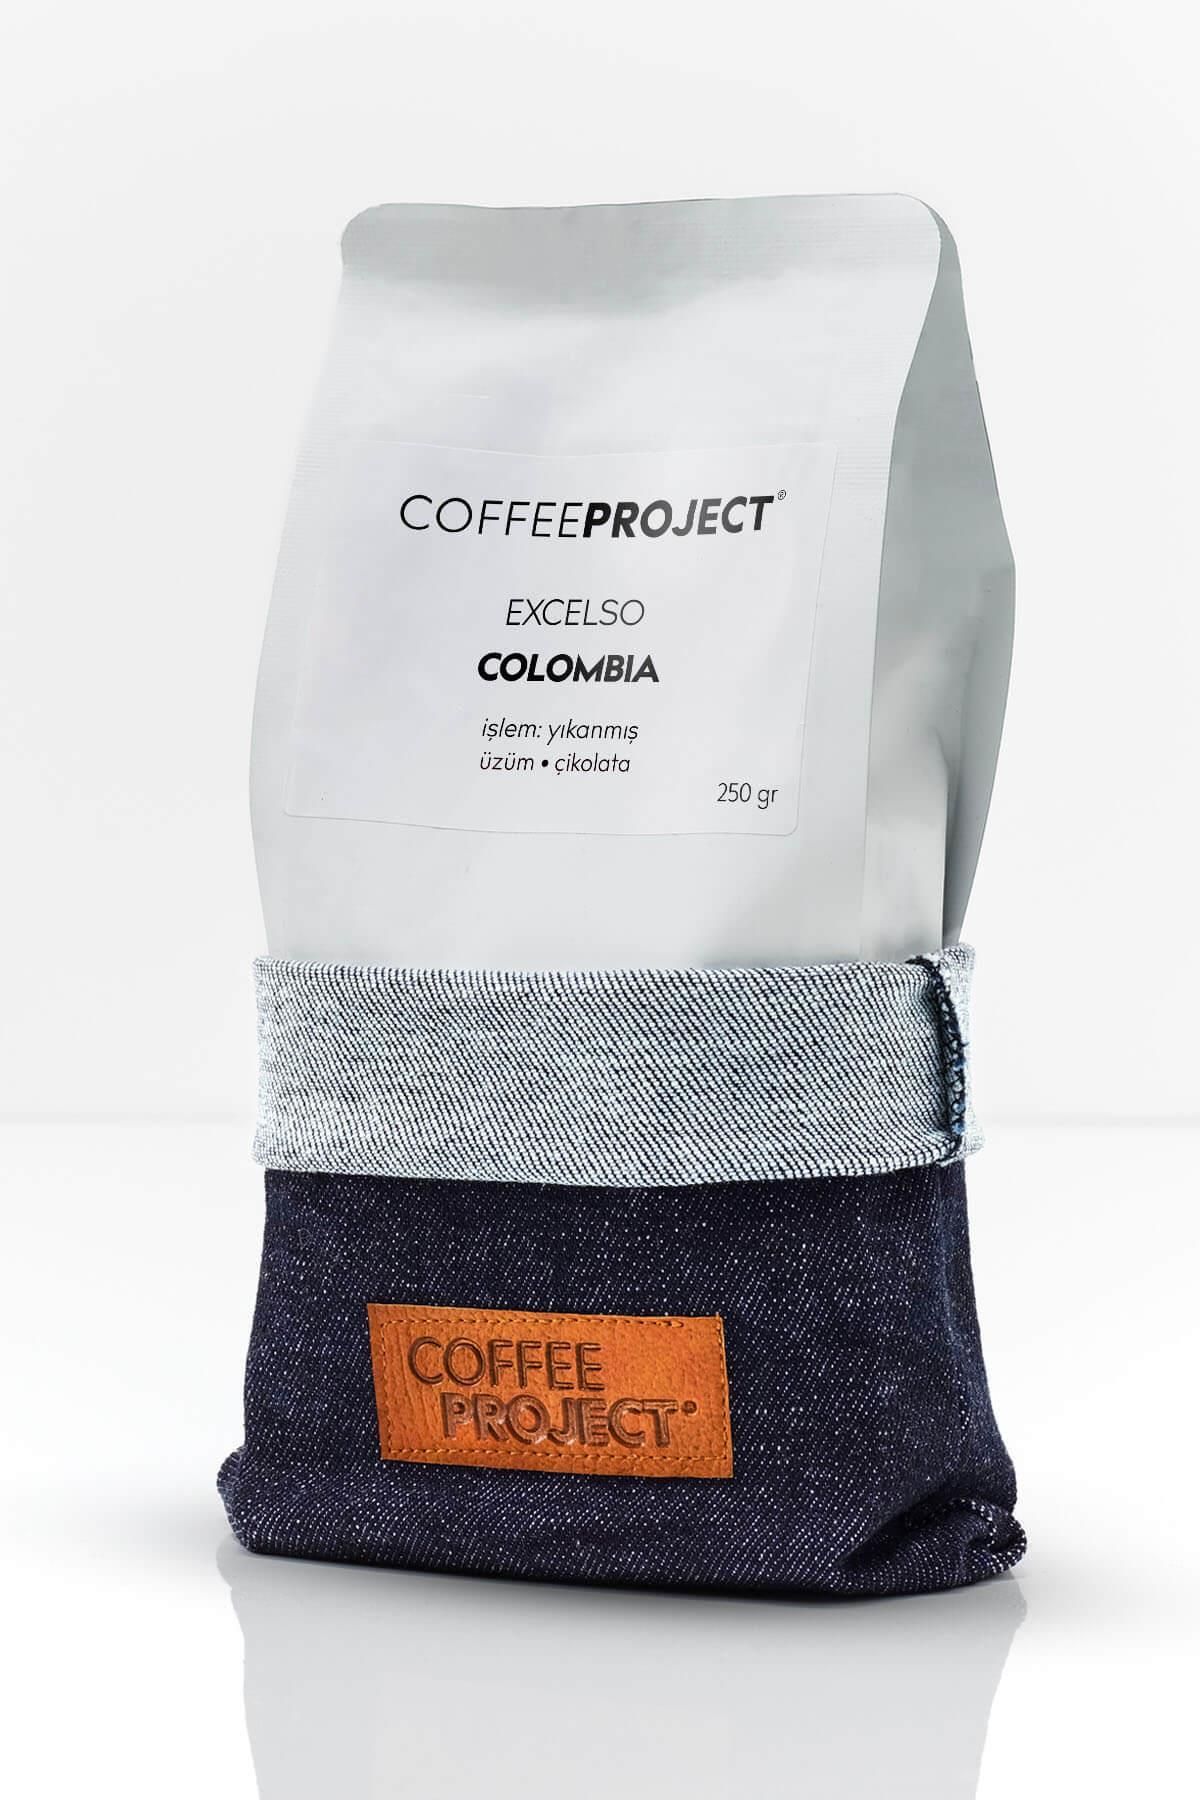 Coffee Project Colombia - Excelso | Filtre Kahve 250 gr